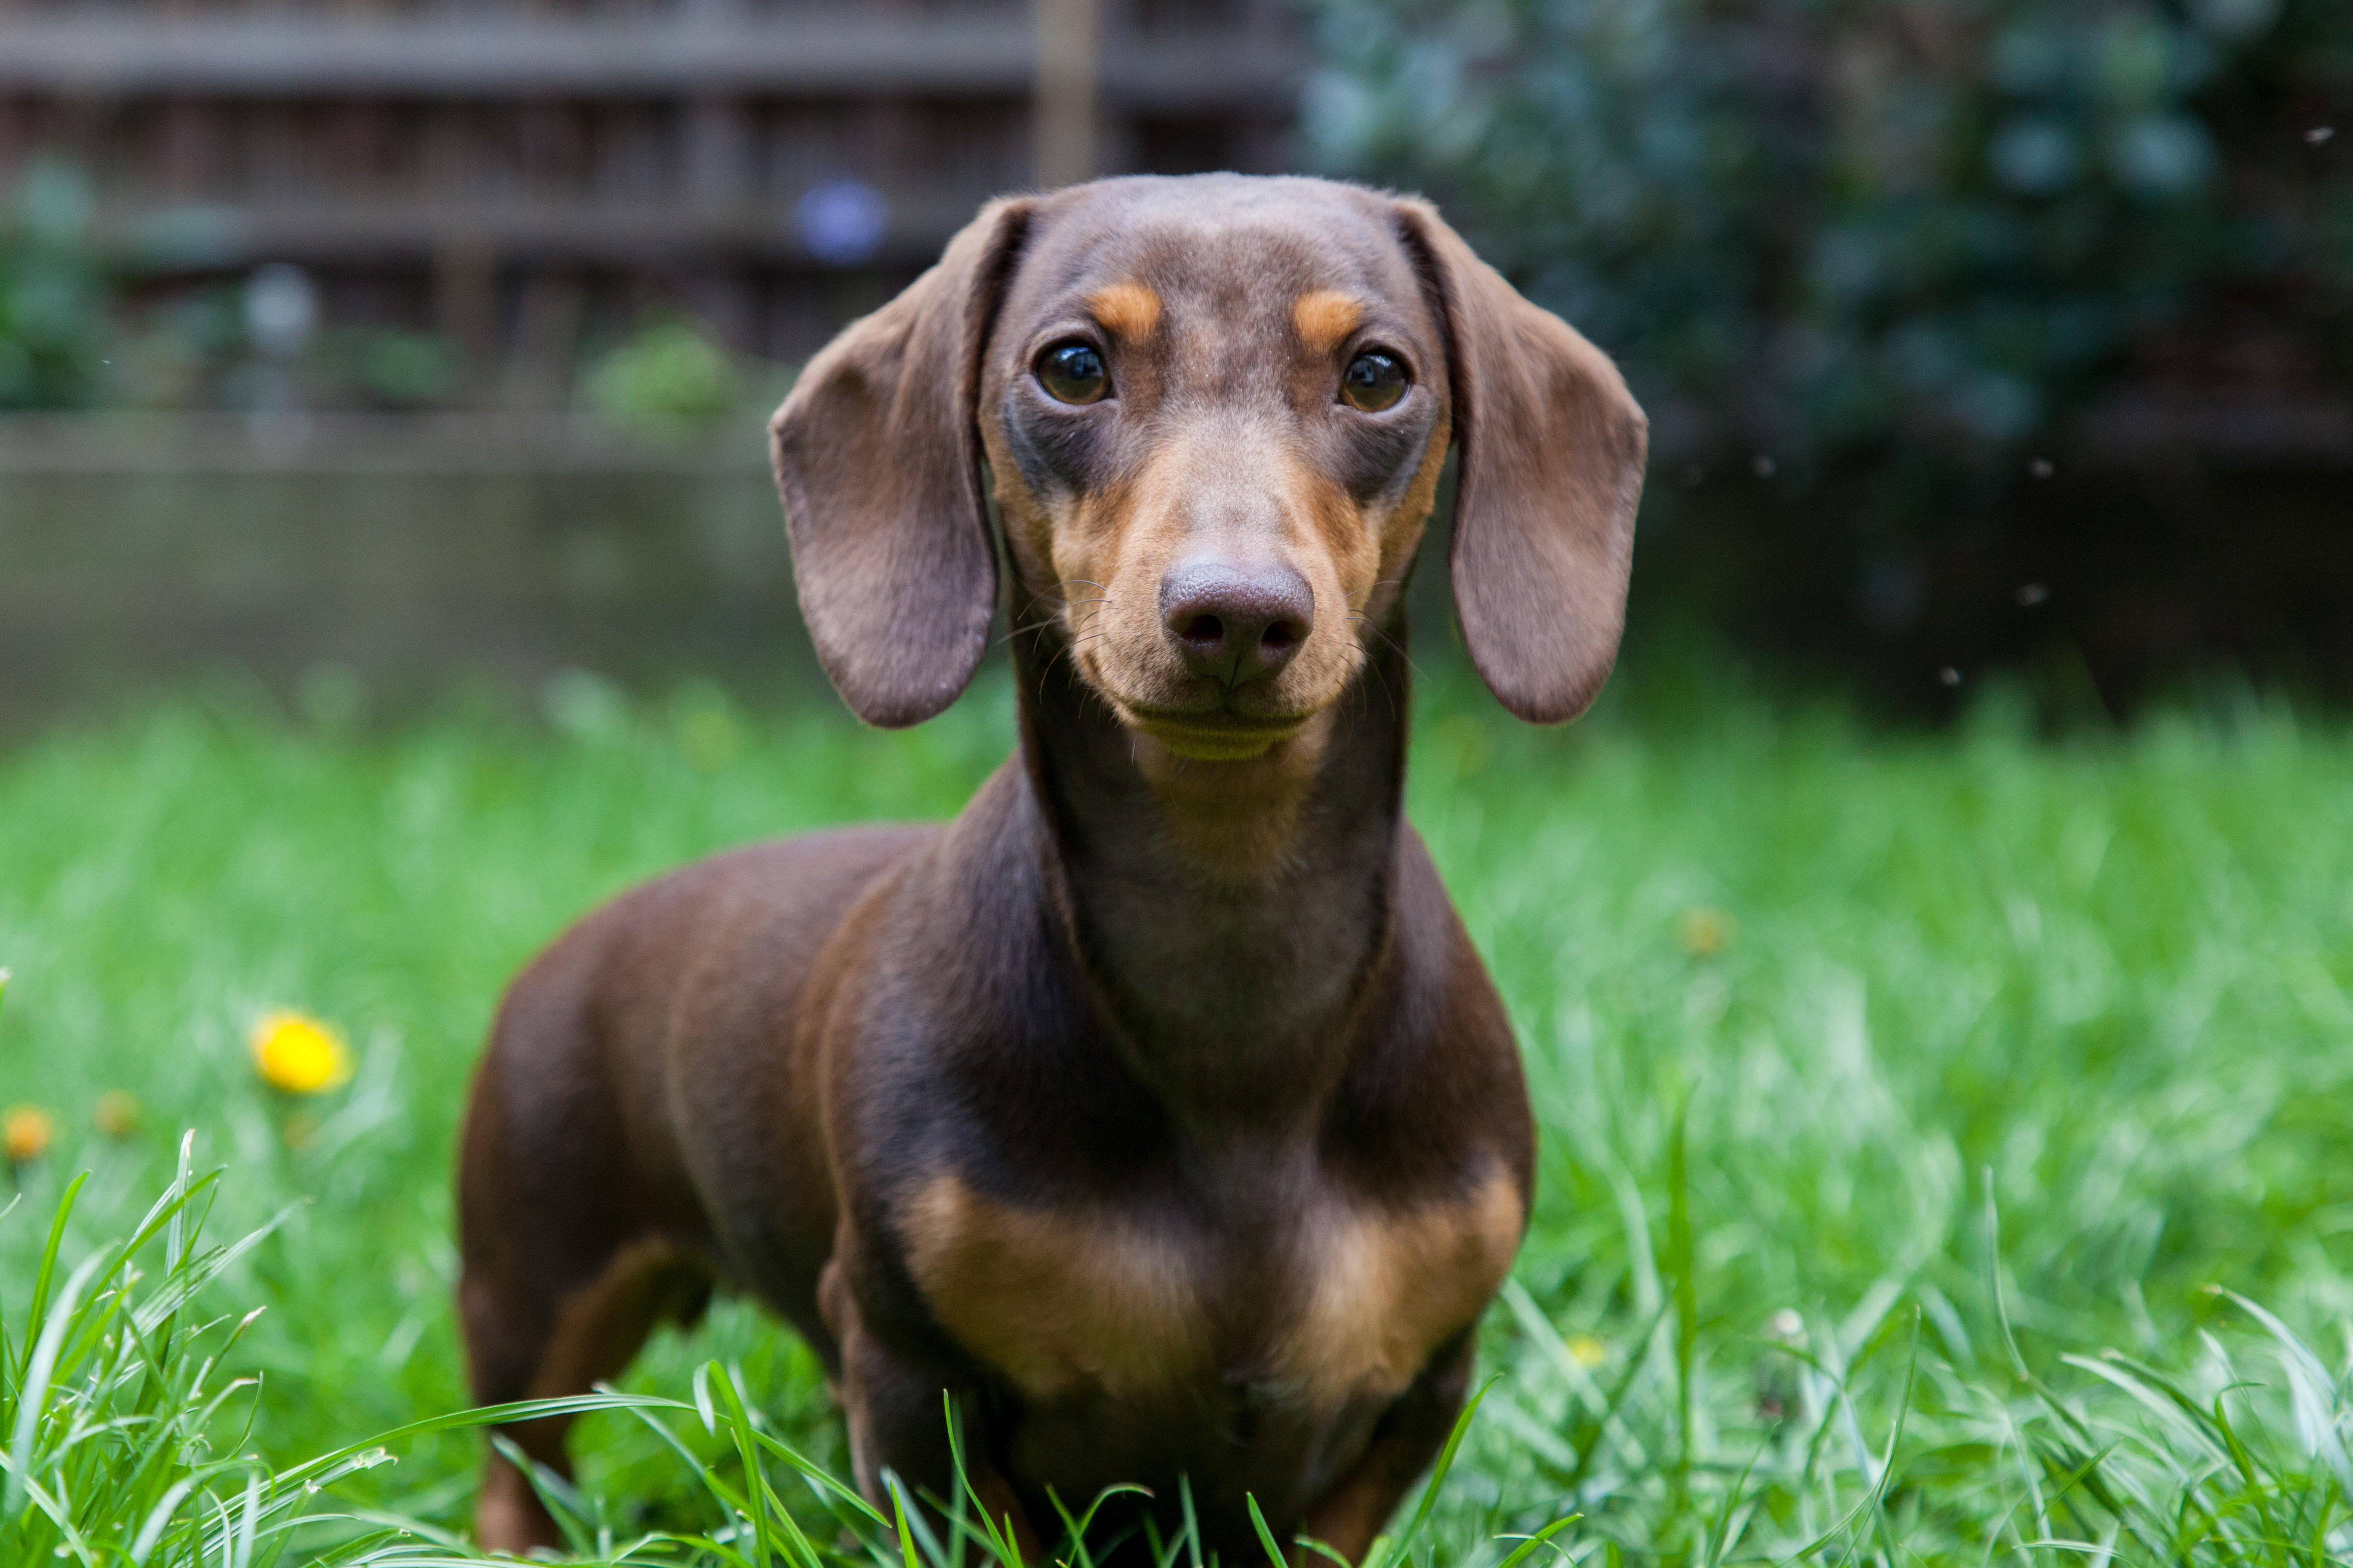 A dachshund sausage dog like the one that attacked Kelly(James Player / Alamy Stock Photo)